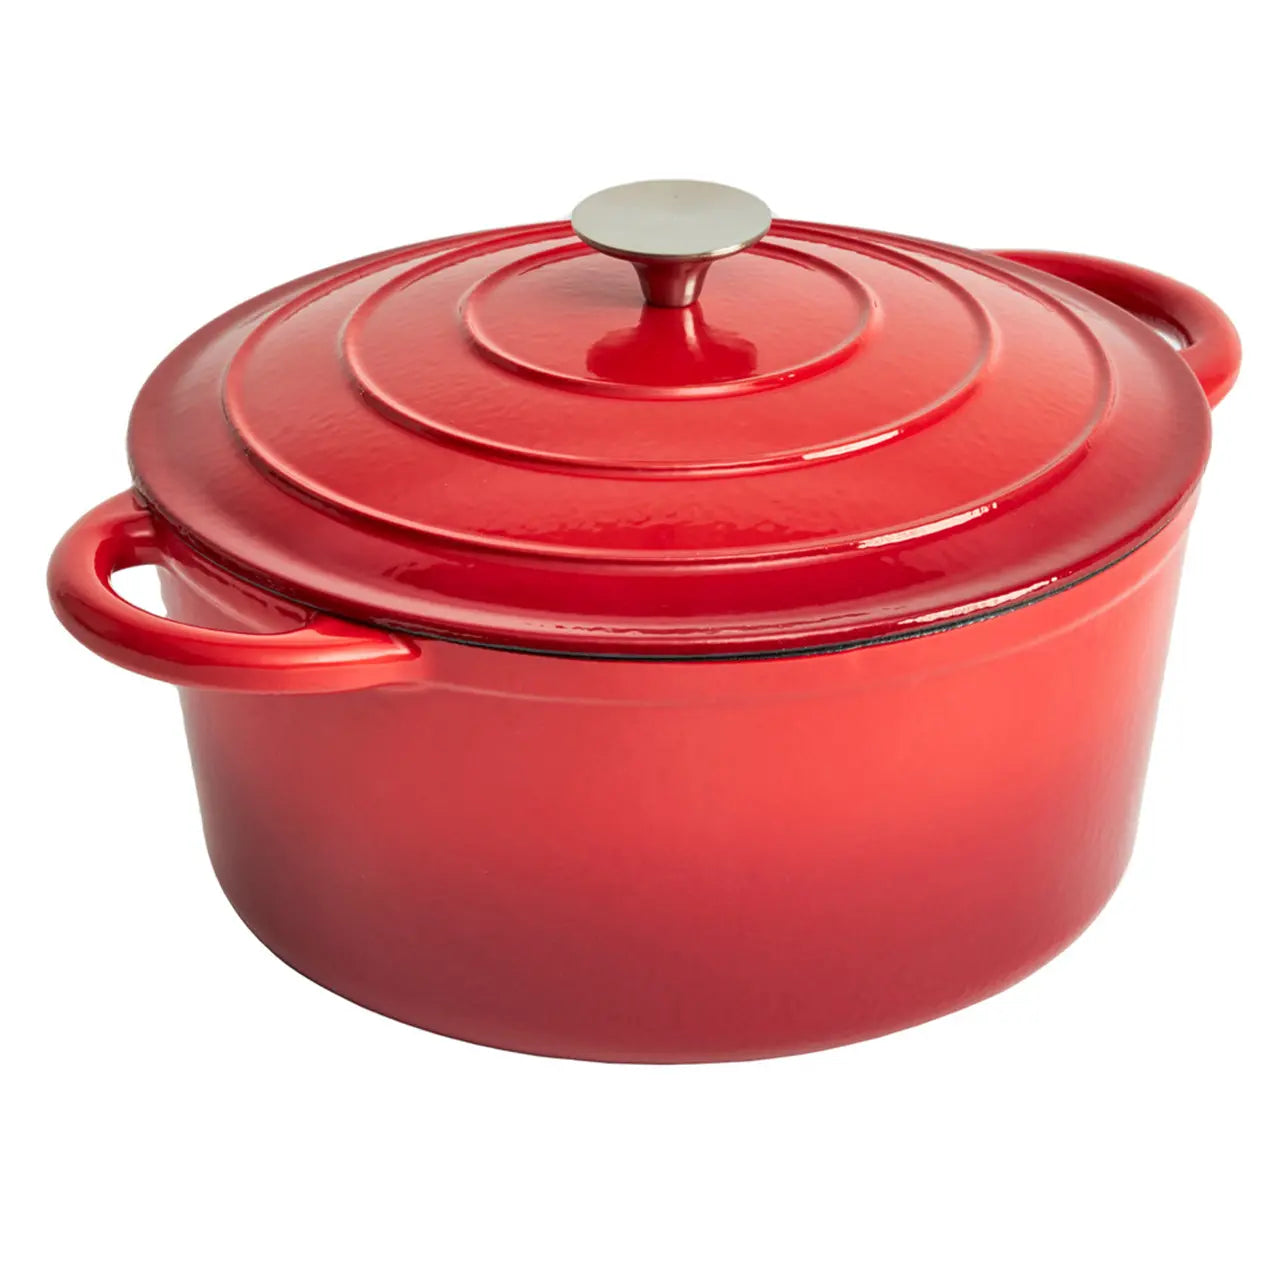 Enameled Cast Iron 11 inch Round Dutch Oven Red